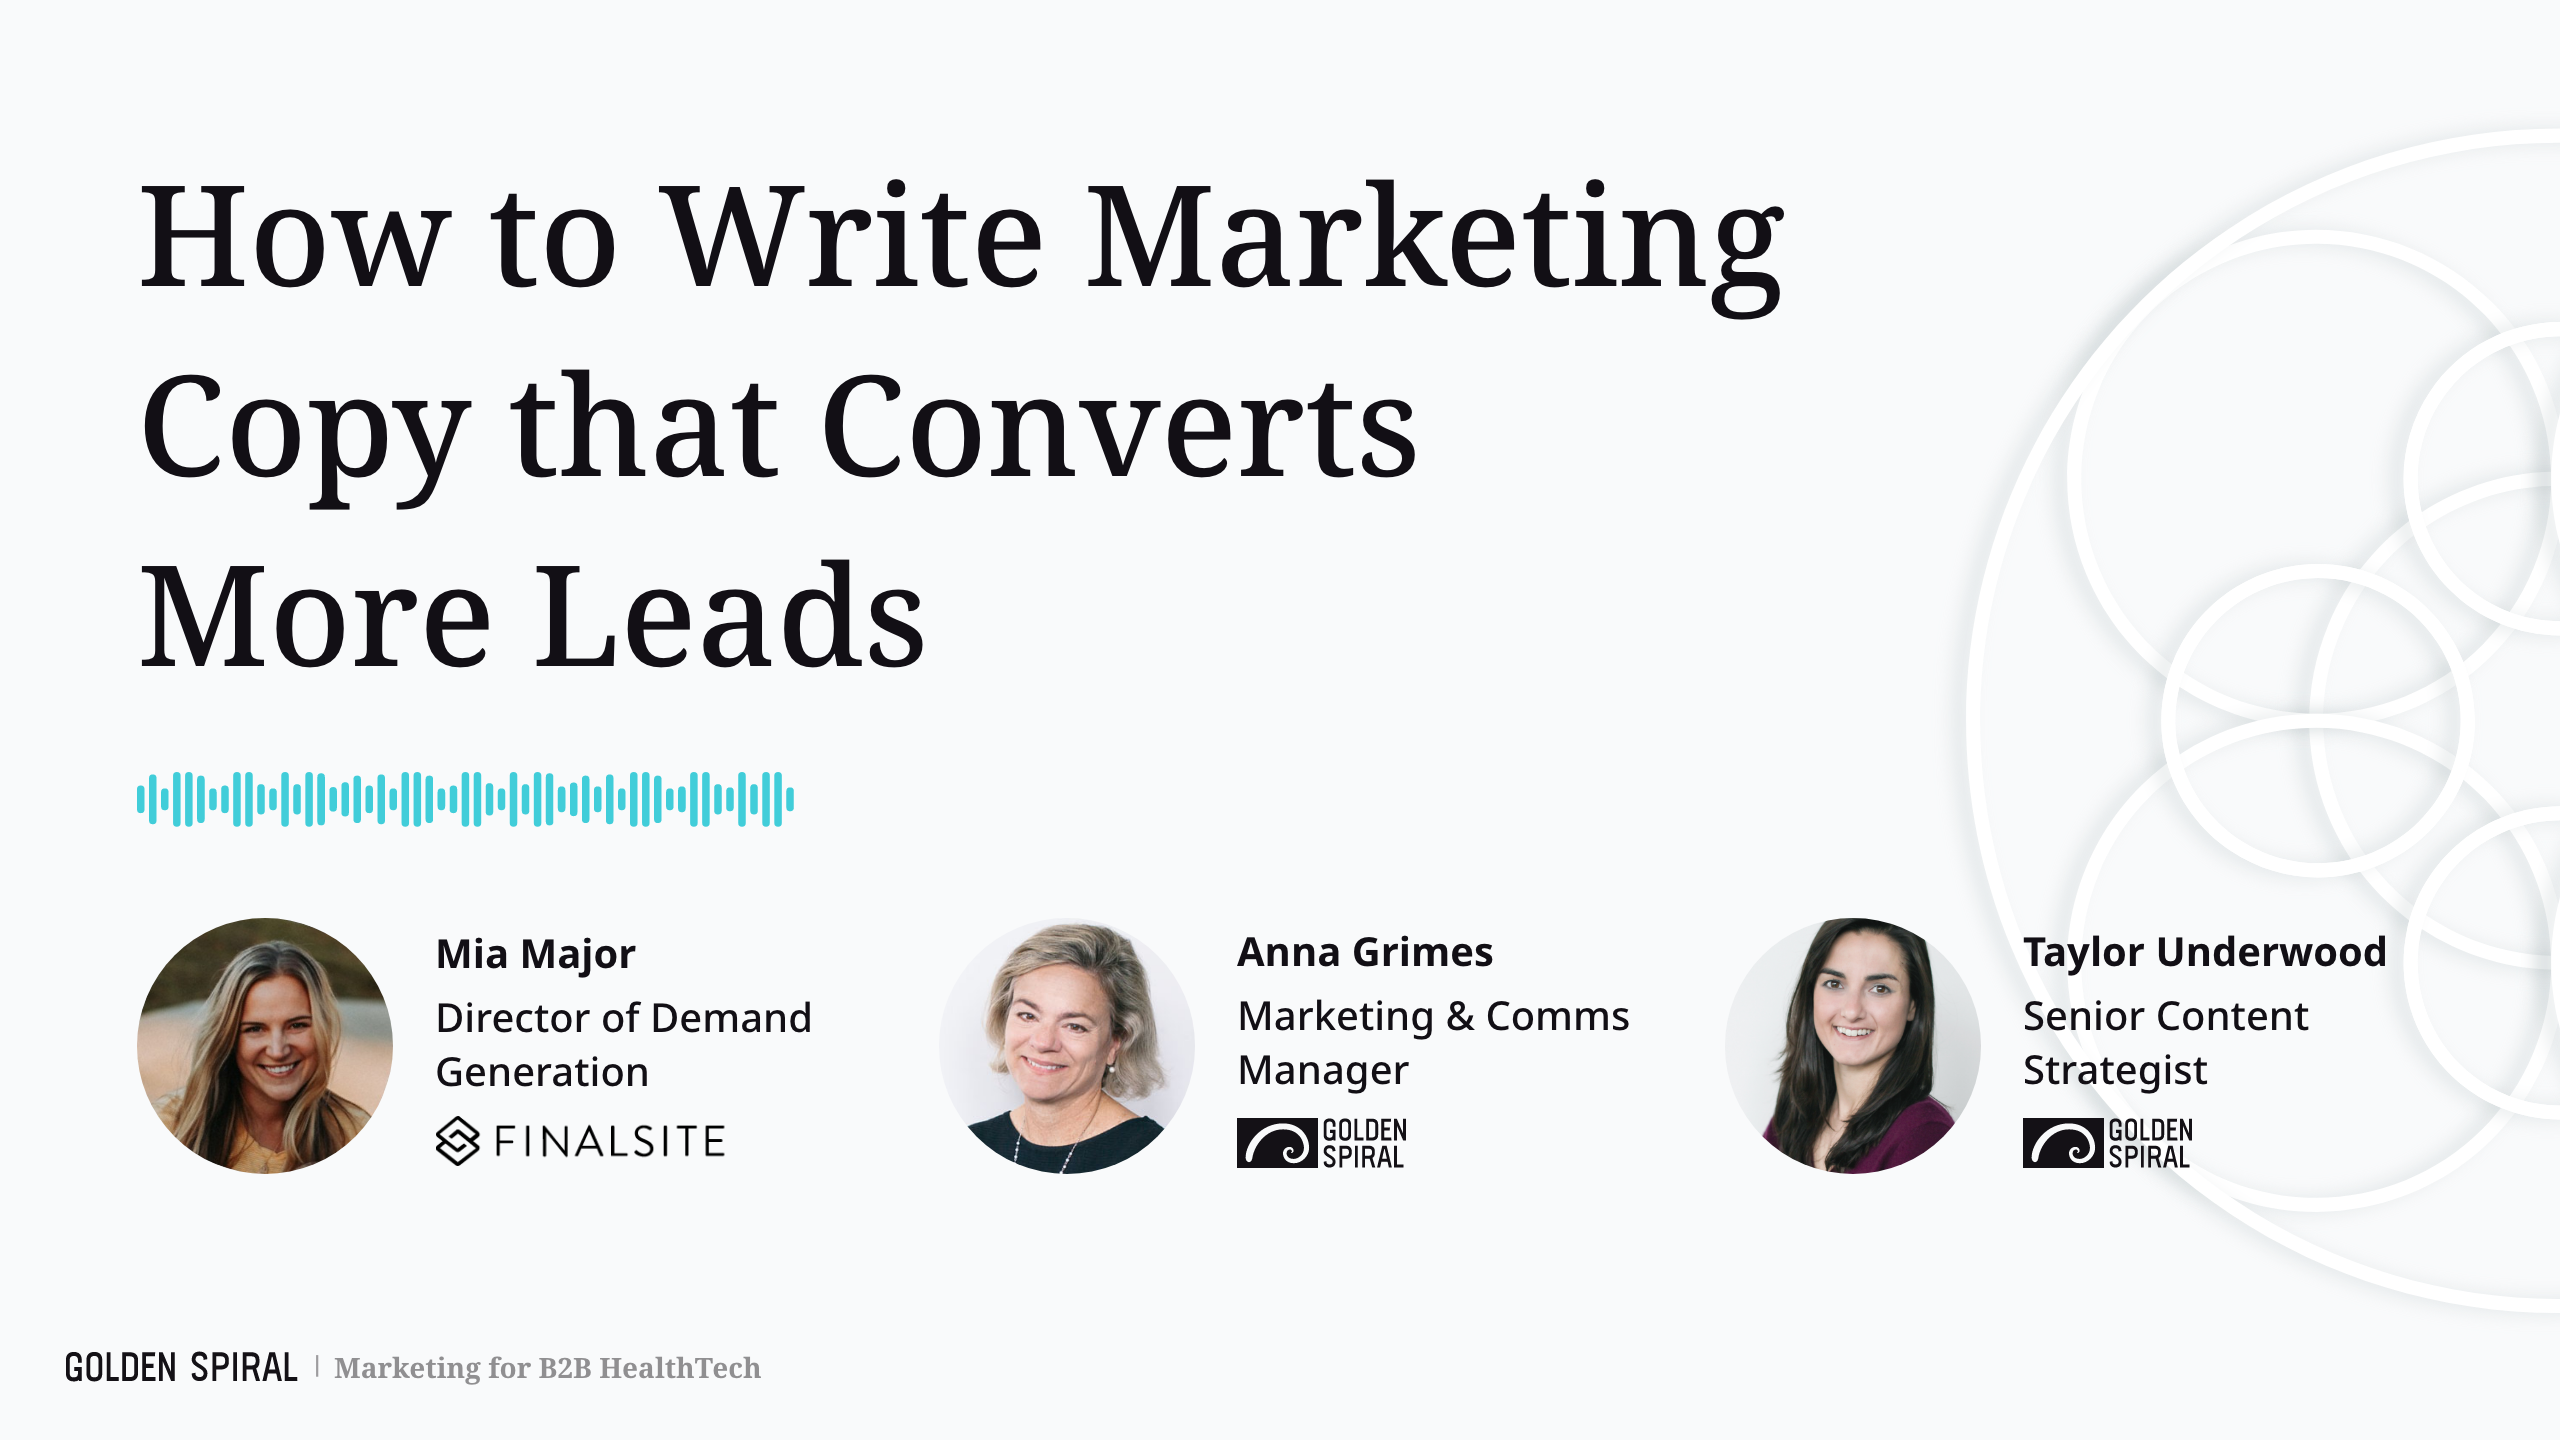 Howto write Marketing Copy that Converts more Leads